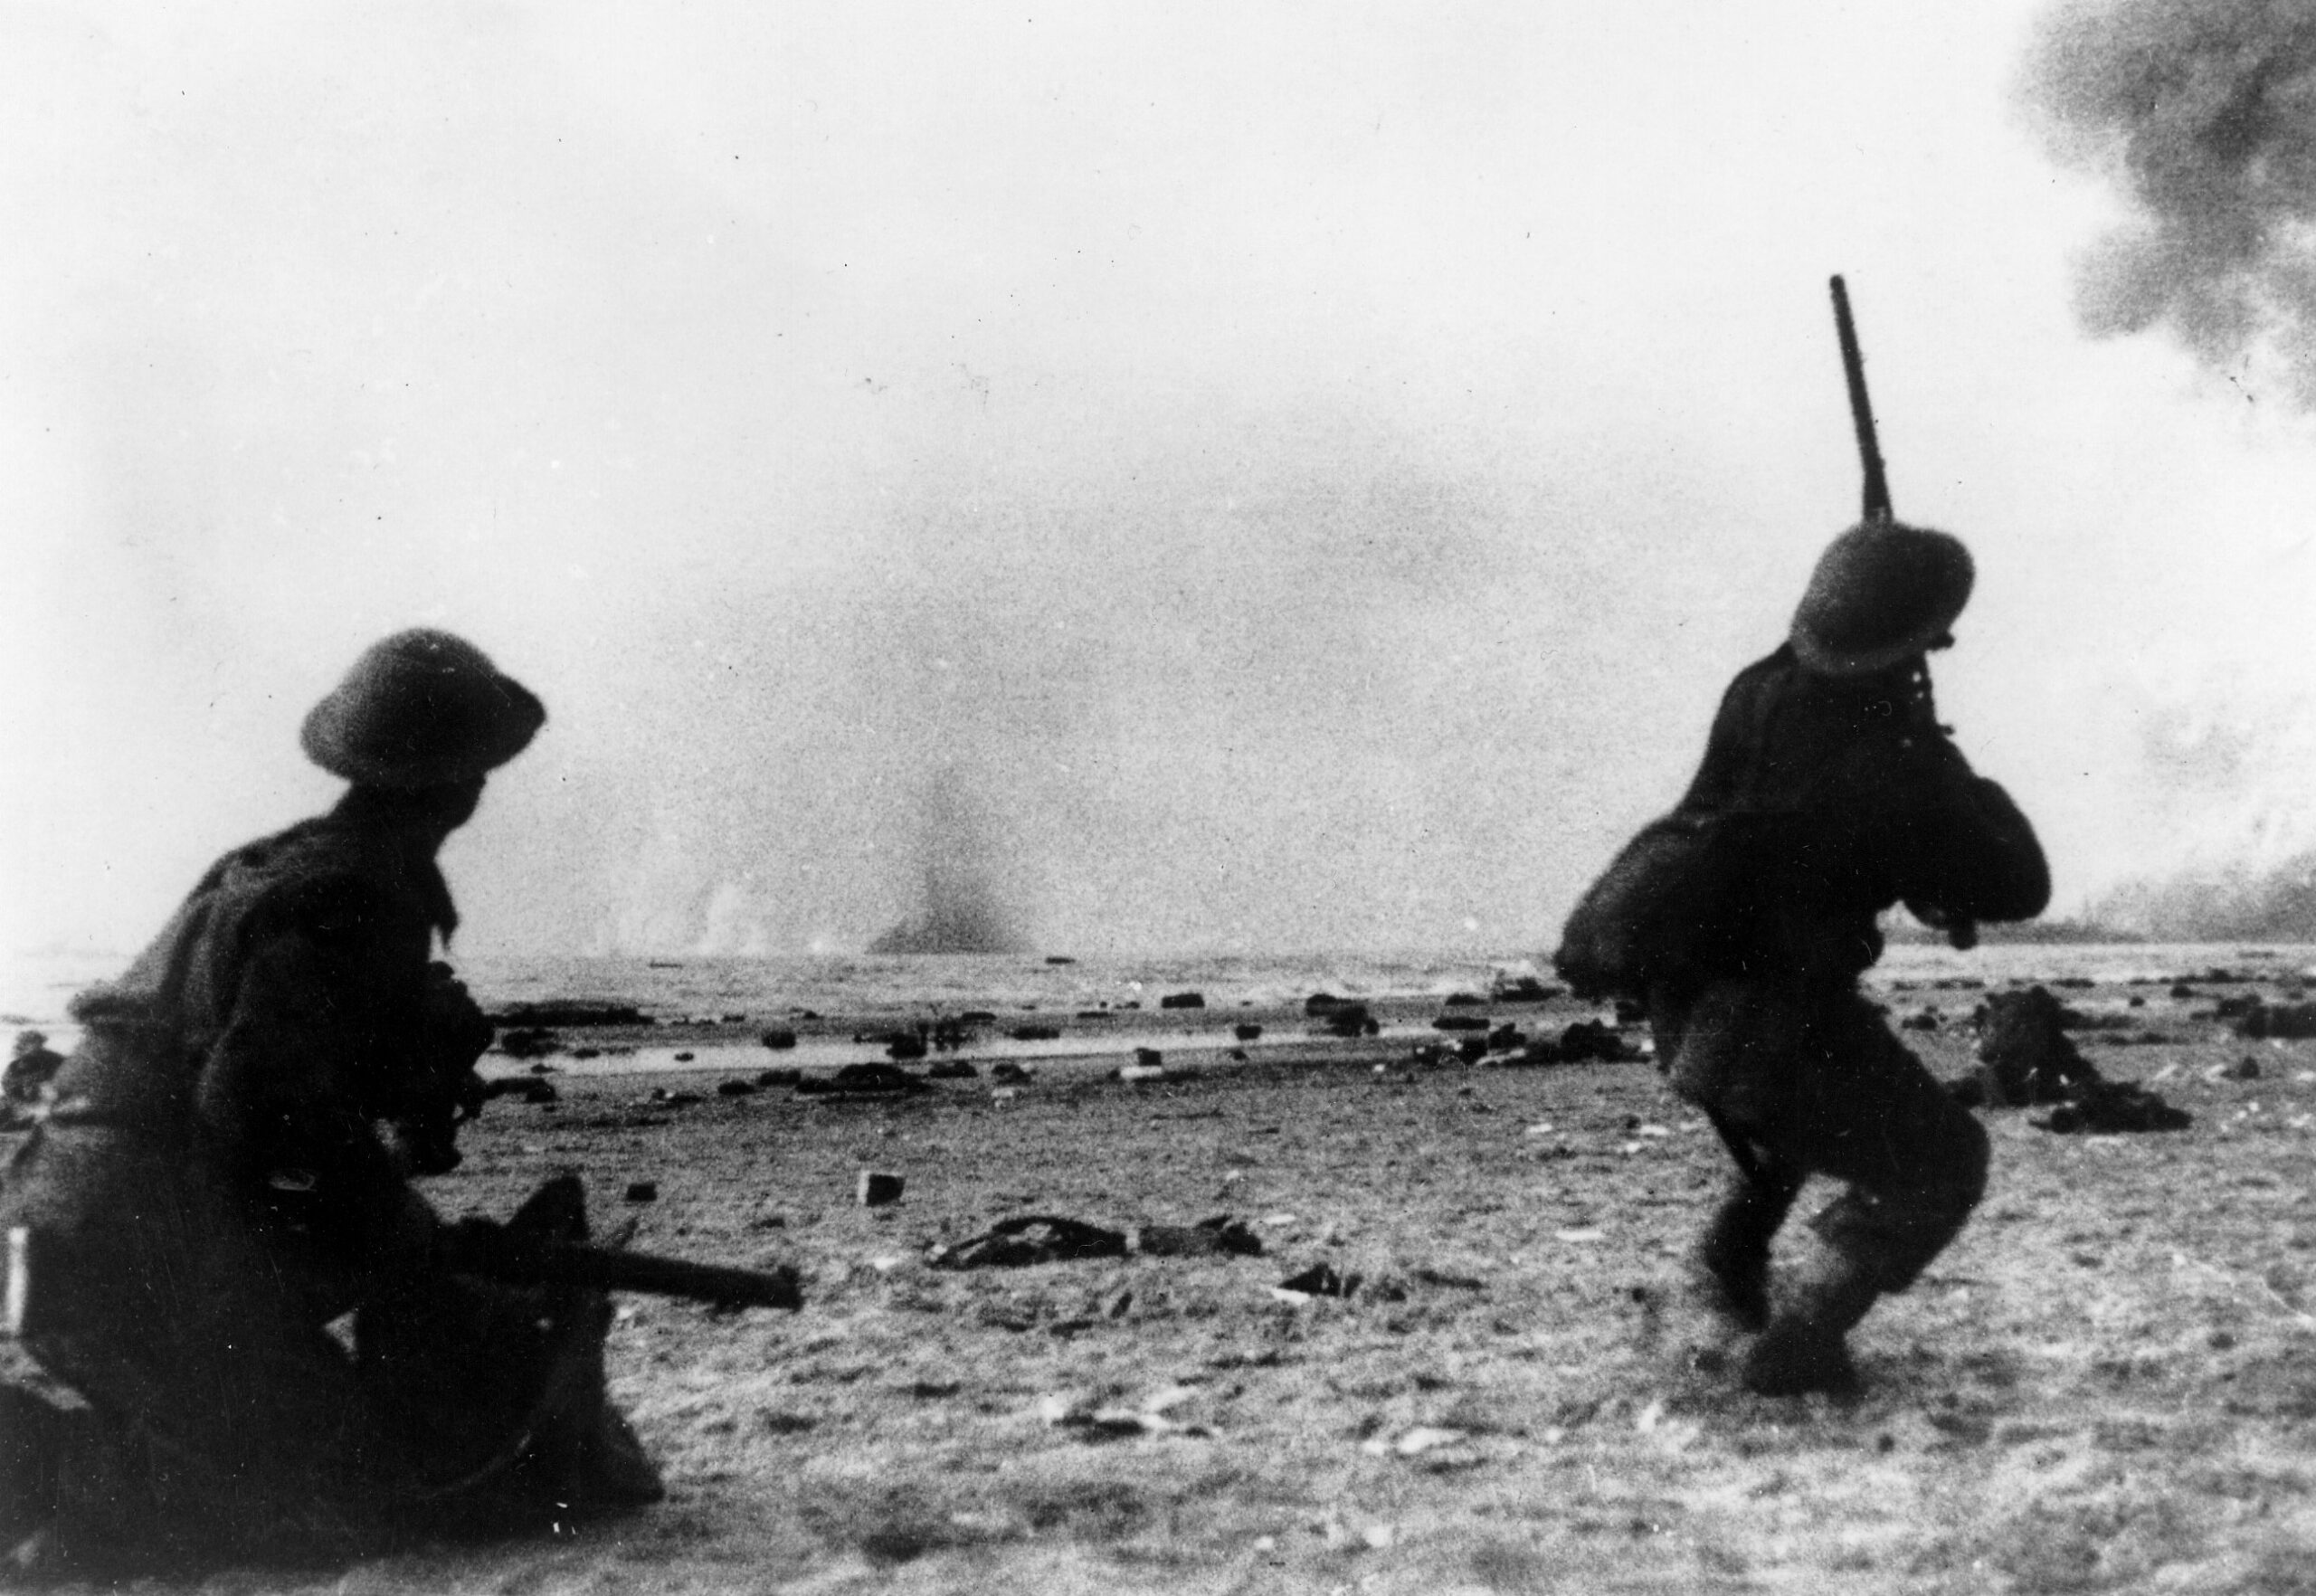 On the beach at Dunkirk, a British soldier takes a pot shot at a low-flying German plane. The Luftwaffe attacked the British at Dunkirk incessantly, but failed to ever deliver a knockout blow. 